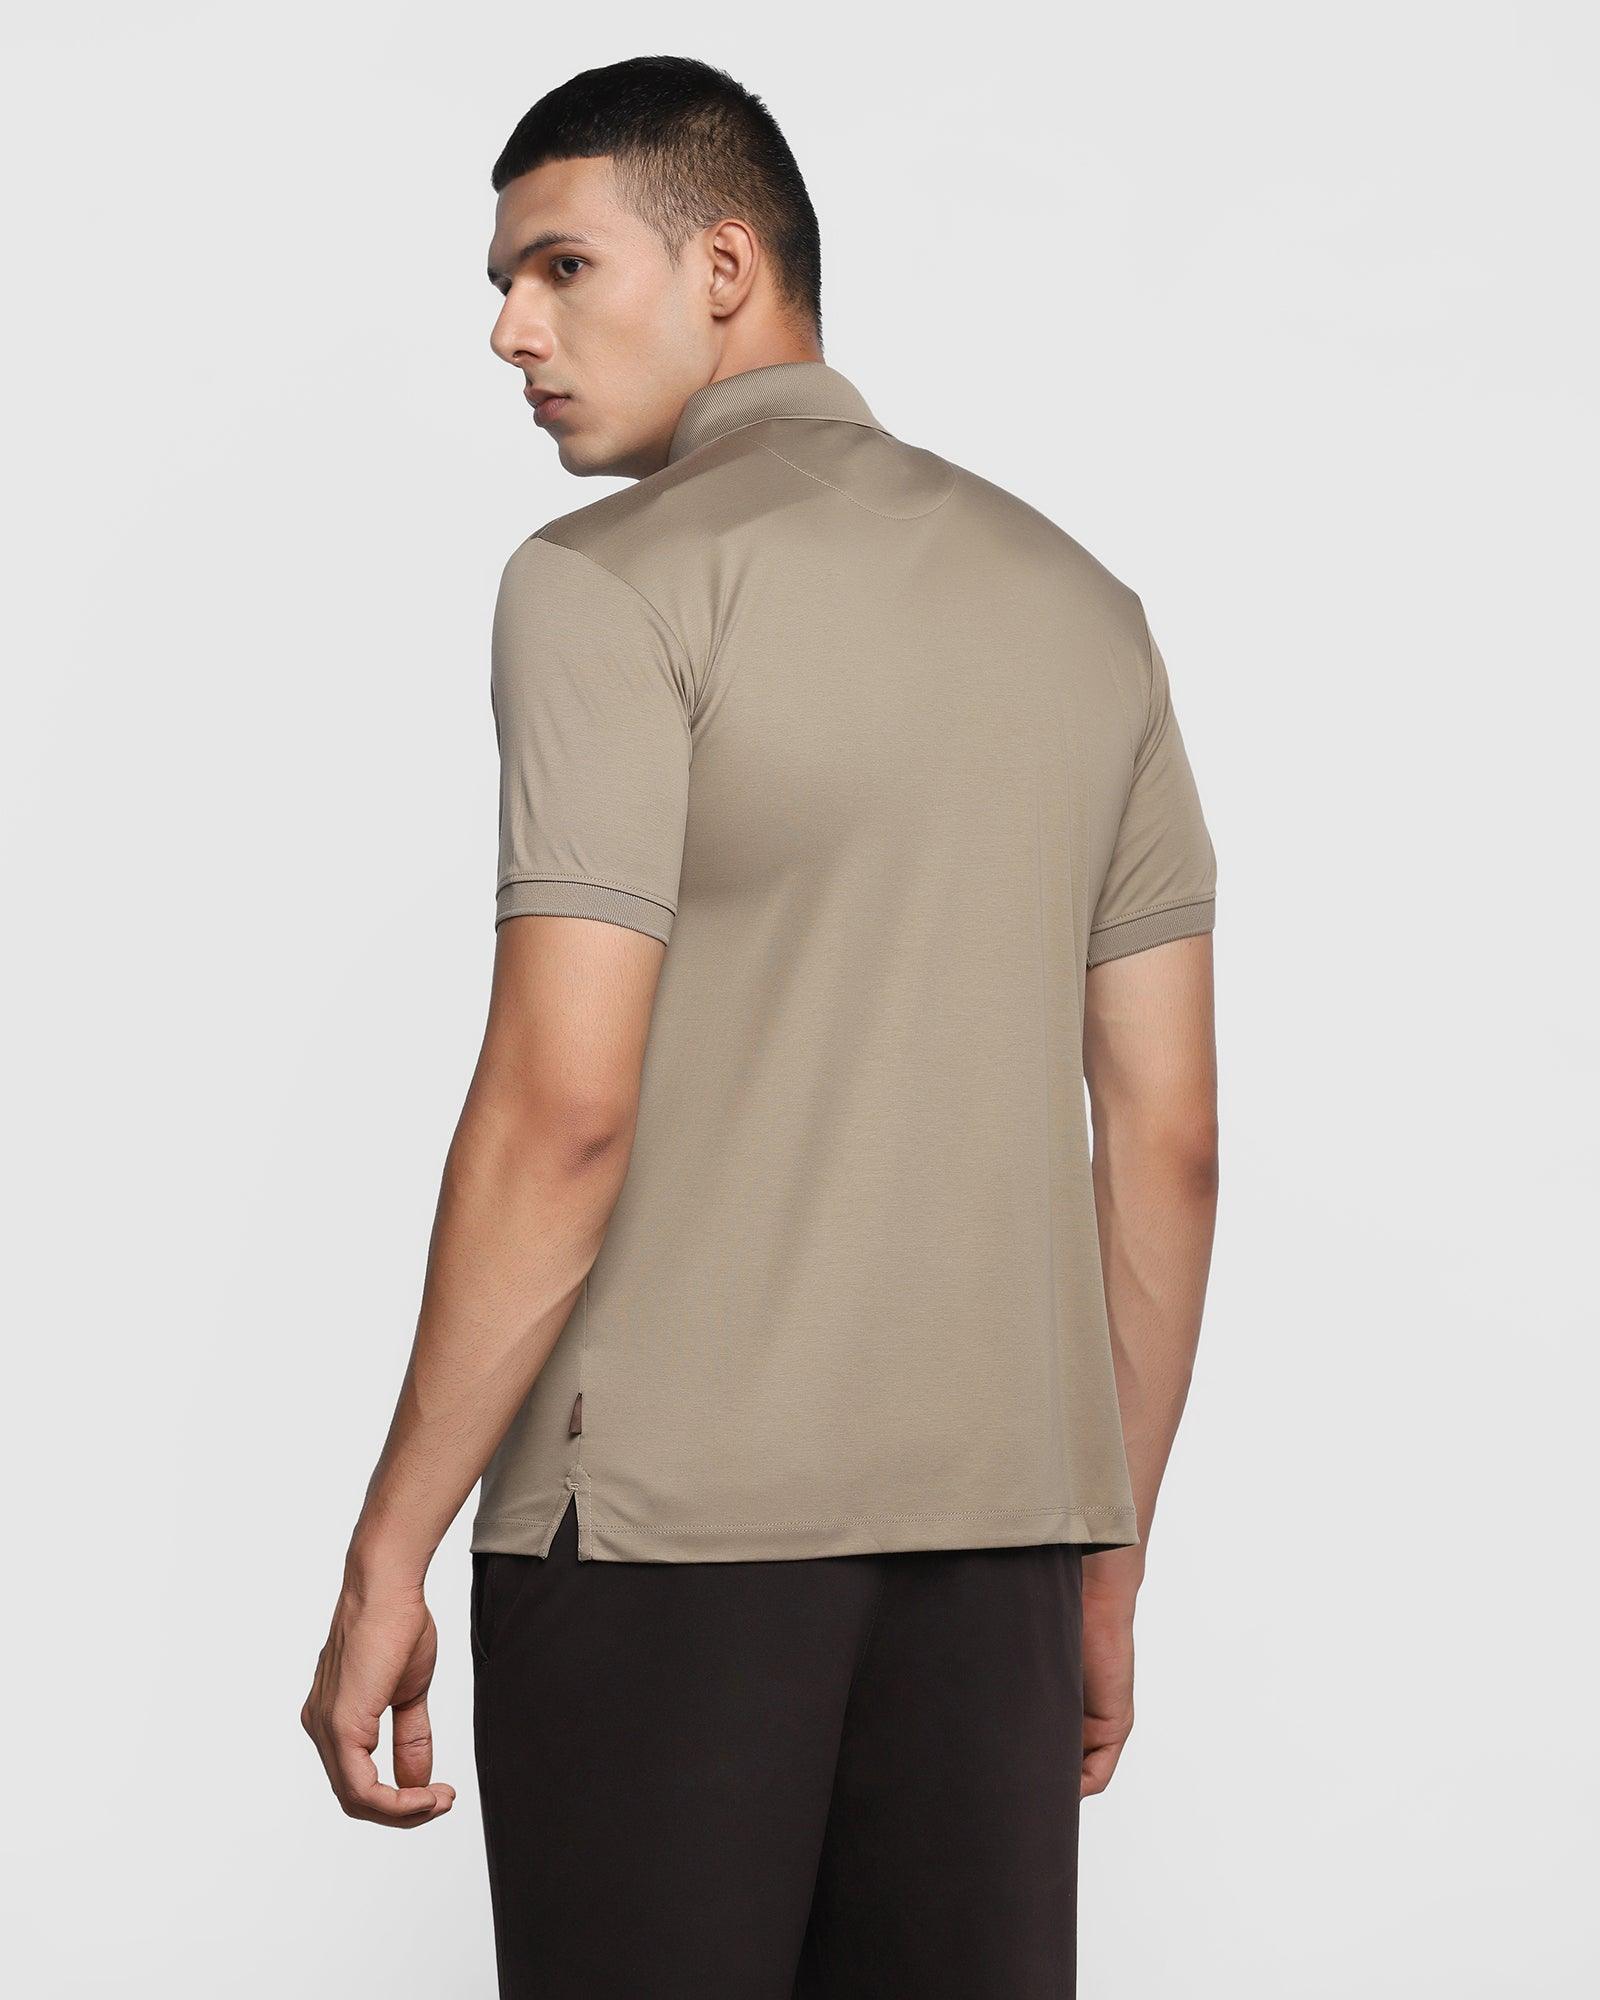 Polo Beige Solid T Shirt - Toll